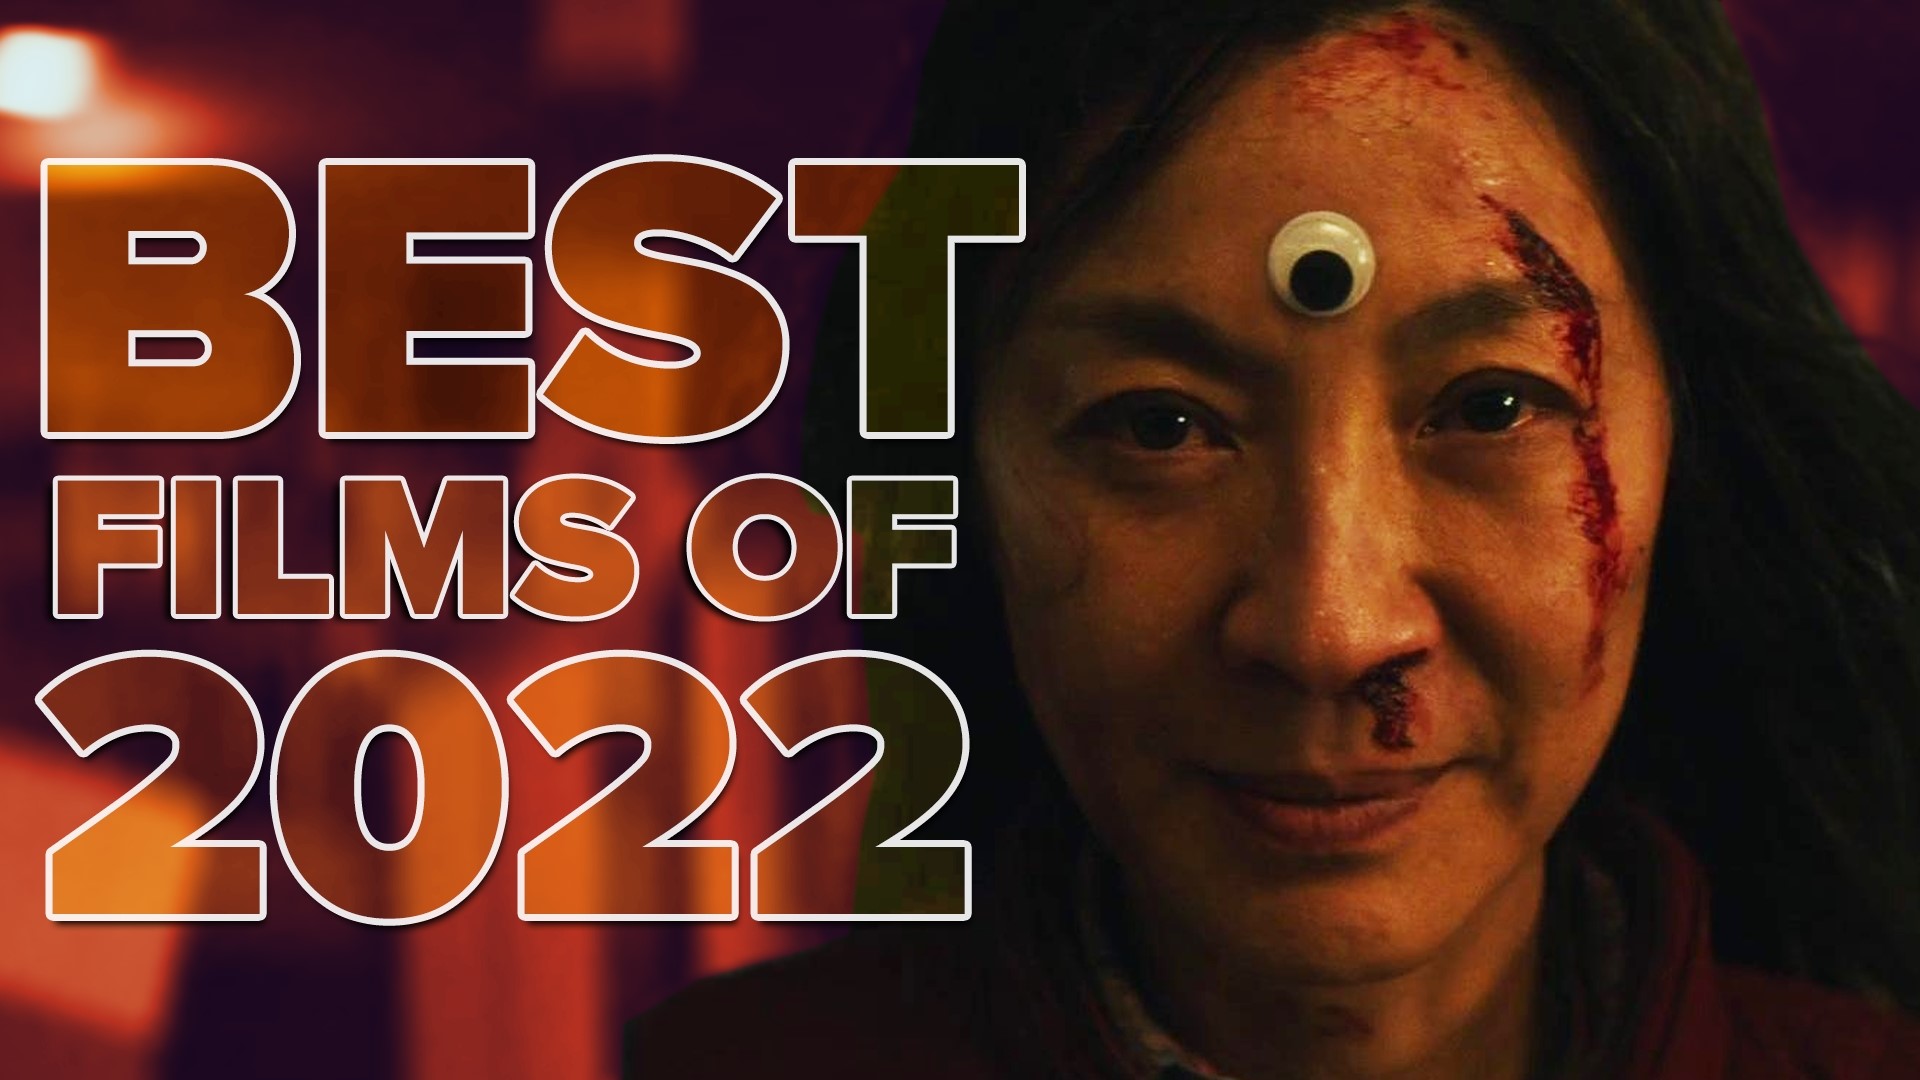 From the multiverse to emo best friends, here's what we thought were the best films of 2022.